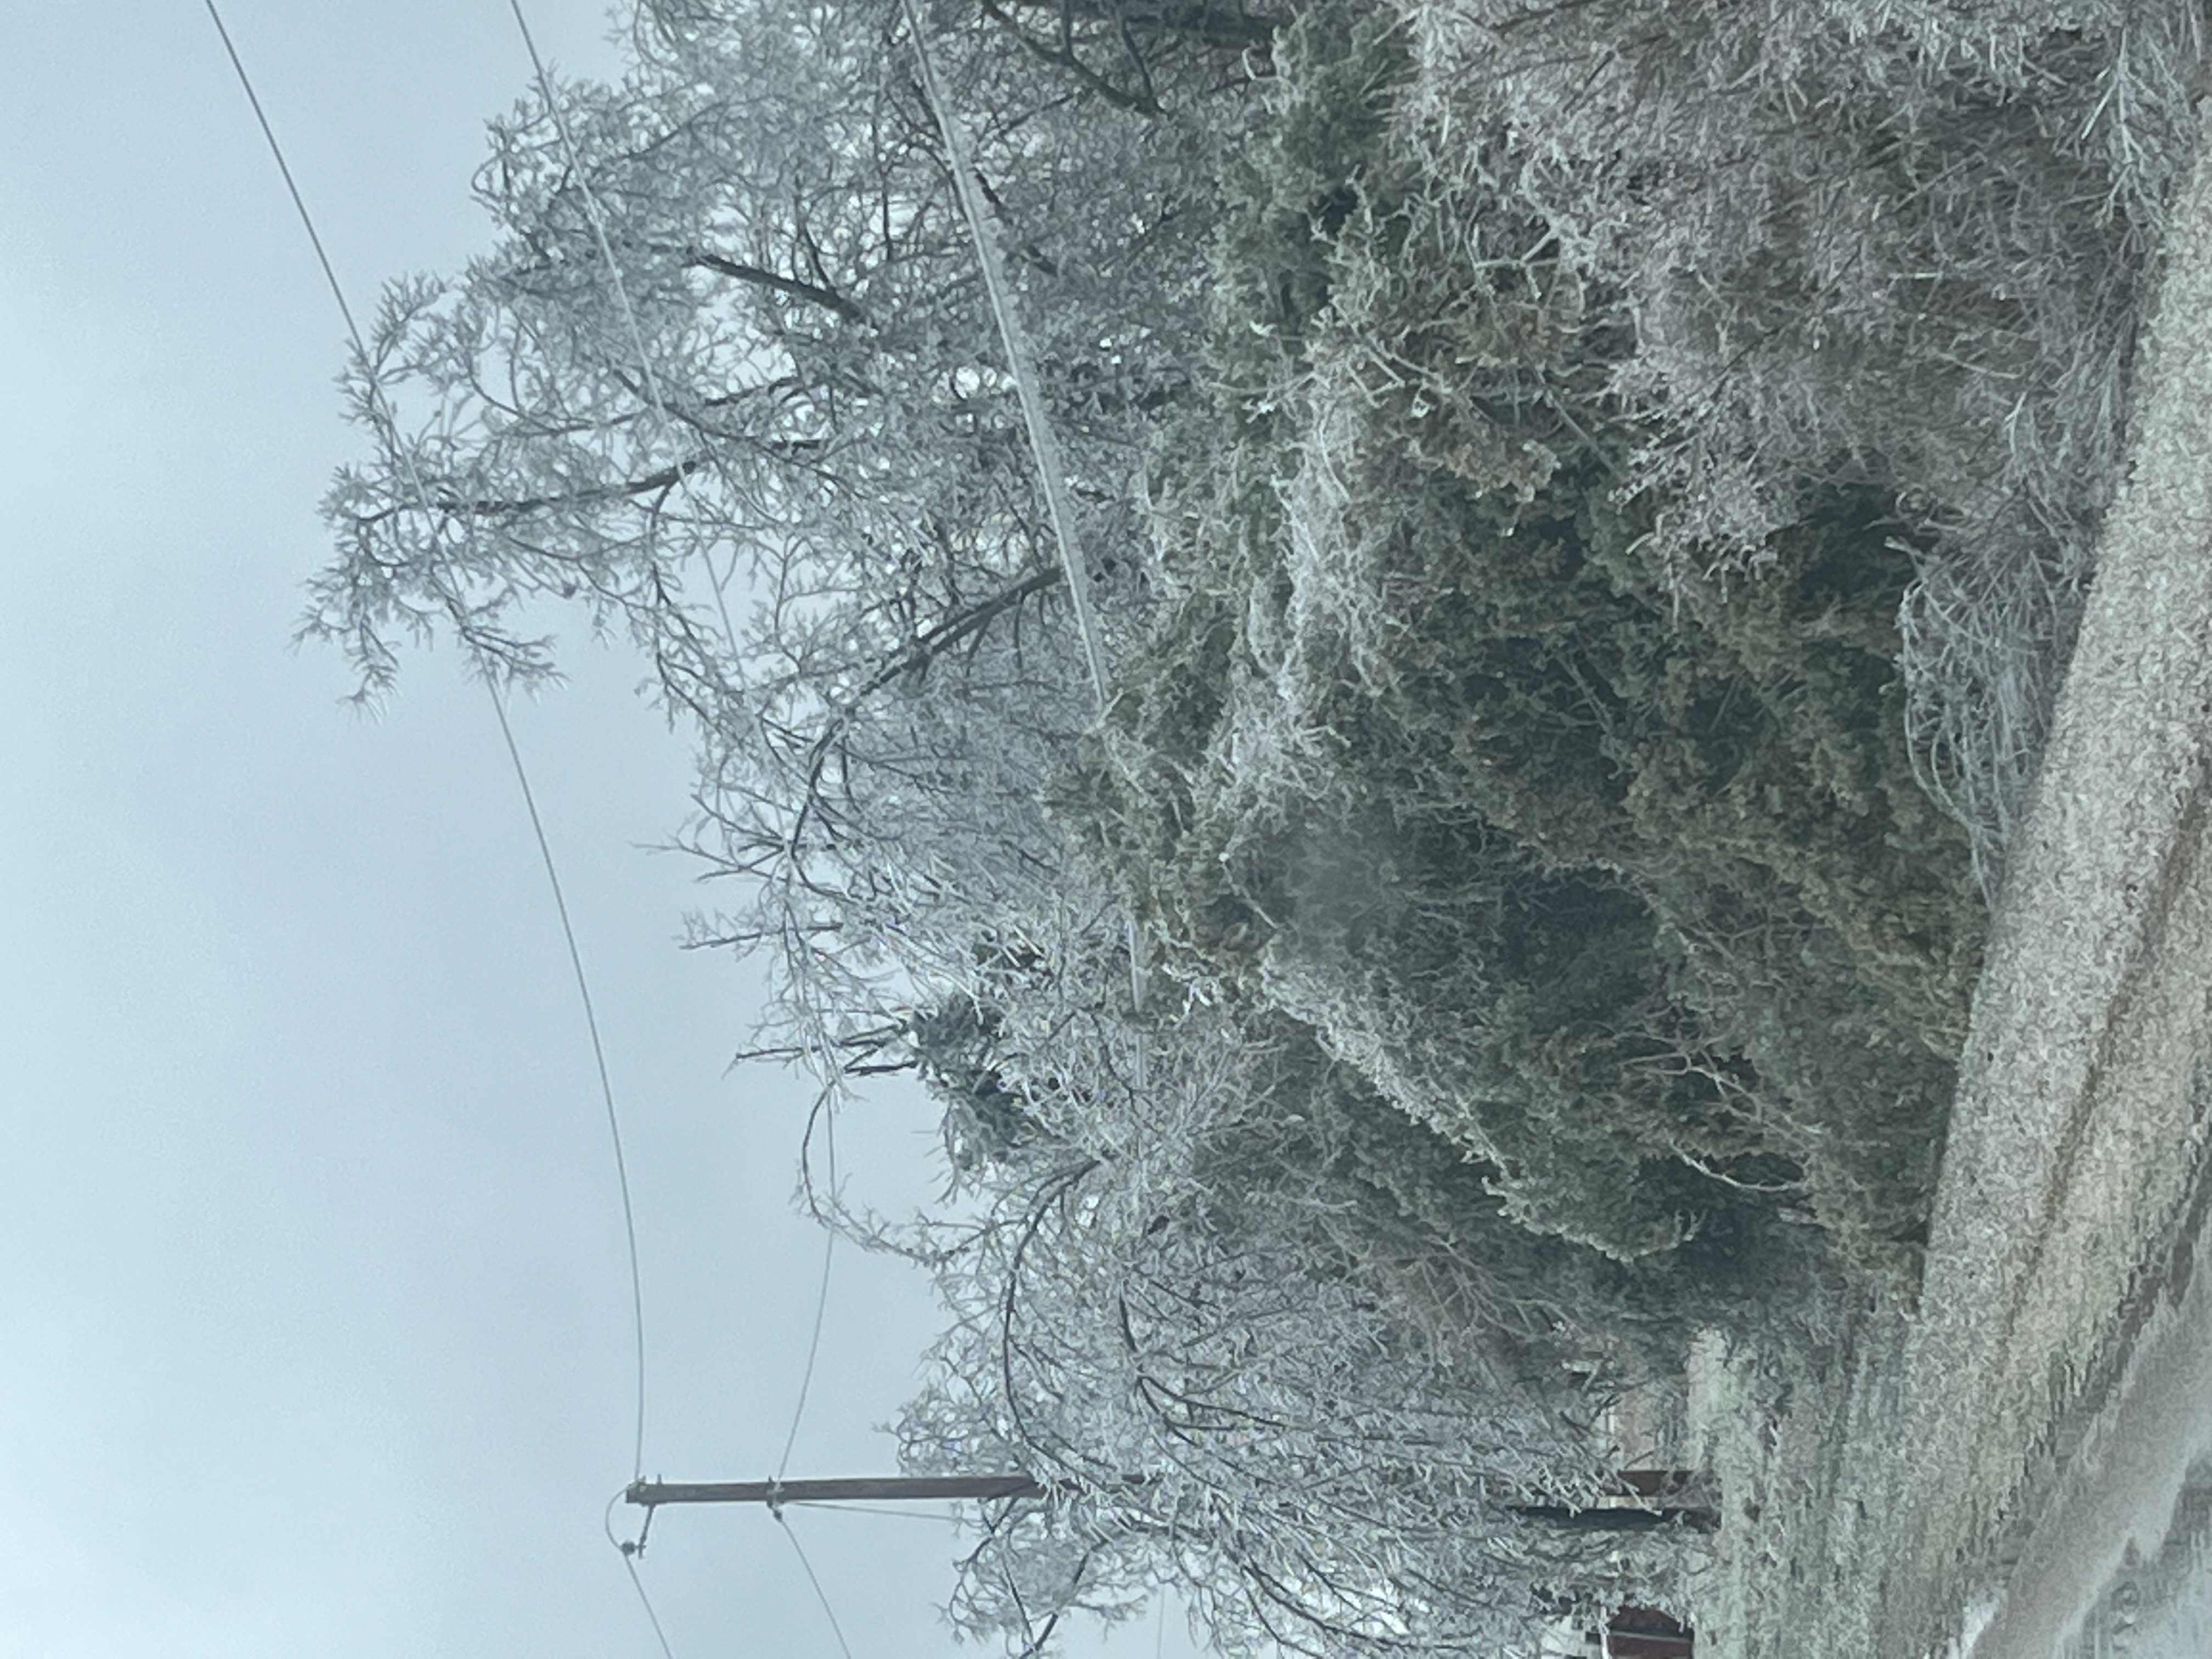 icy trees and power lines (Lamar County)